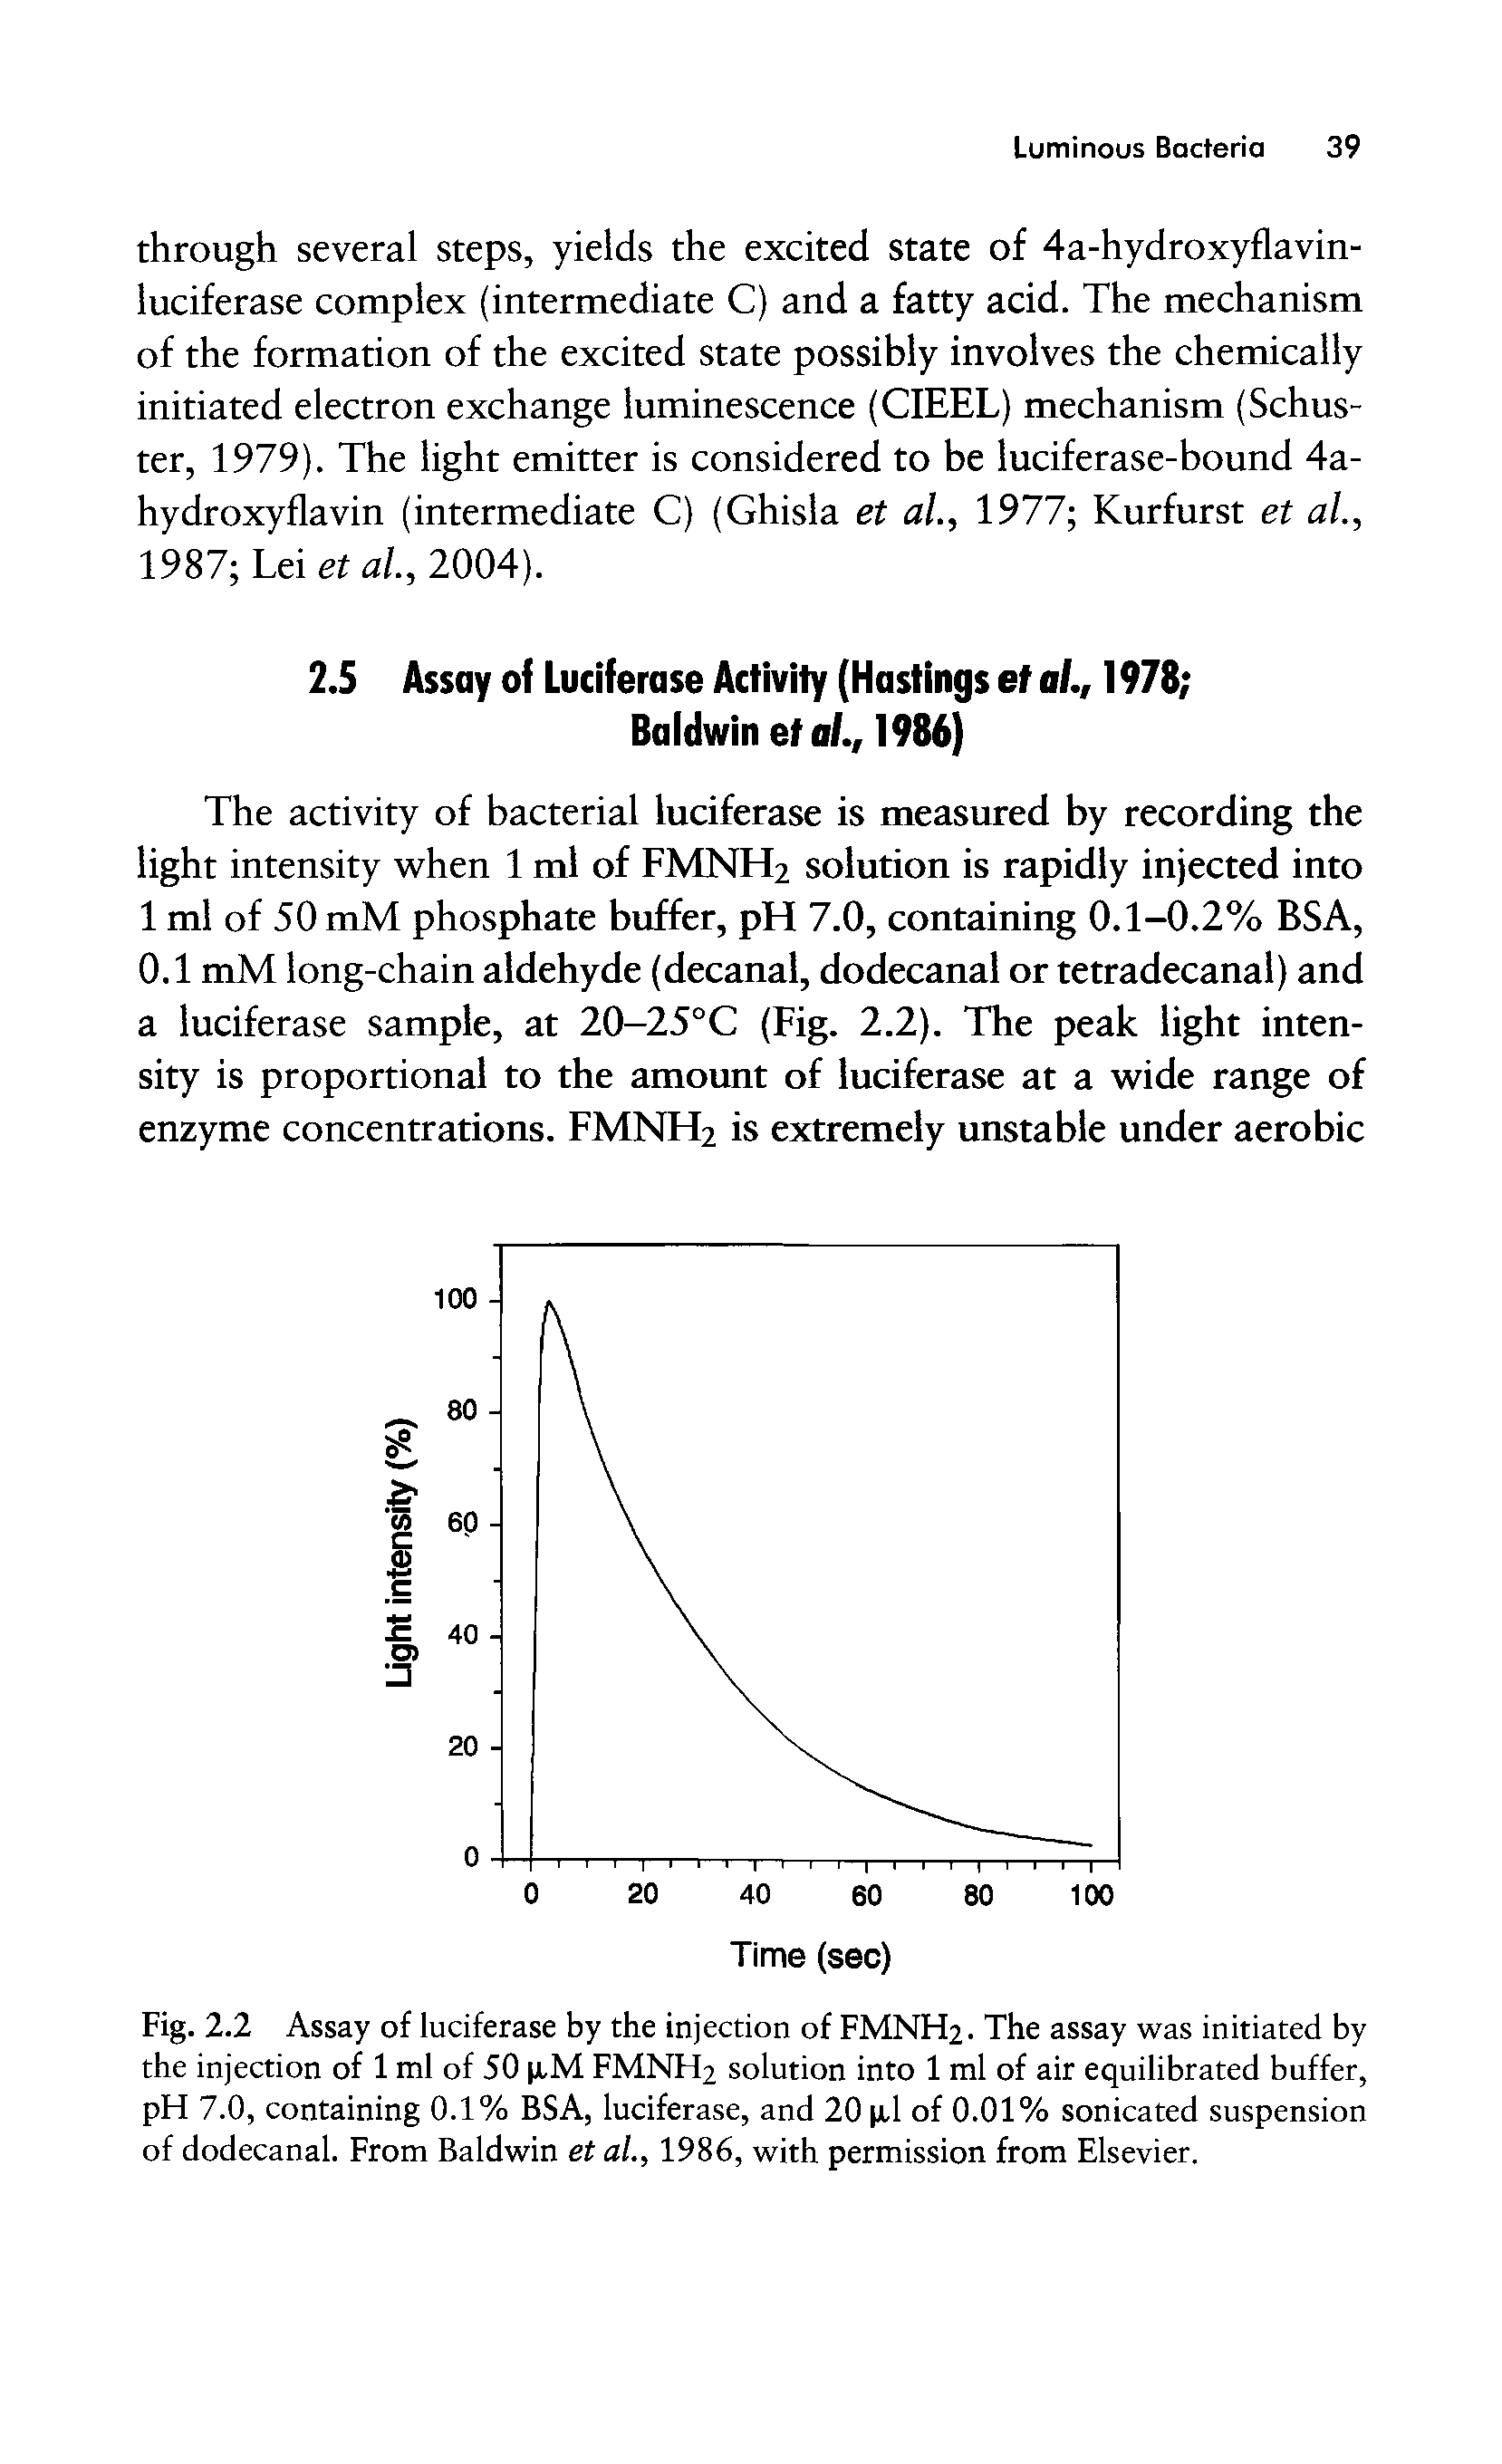 Fig. 2.2 Assay of luciferase by the injection of FMNH2. The assay was initiated by the injection of 1 ml of 50 JtM FMNH2 solution into 1 ml of air equilibrated buffer, pH 7.0, containing 0.1% BSA, luciferase, and 20 gl of 0.01% sonicated suspension of dodecanal. From Baldwin et al., 1986, with permission from Elsevier.